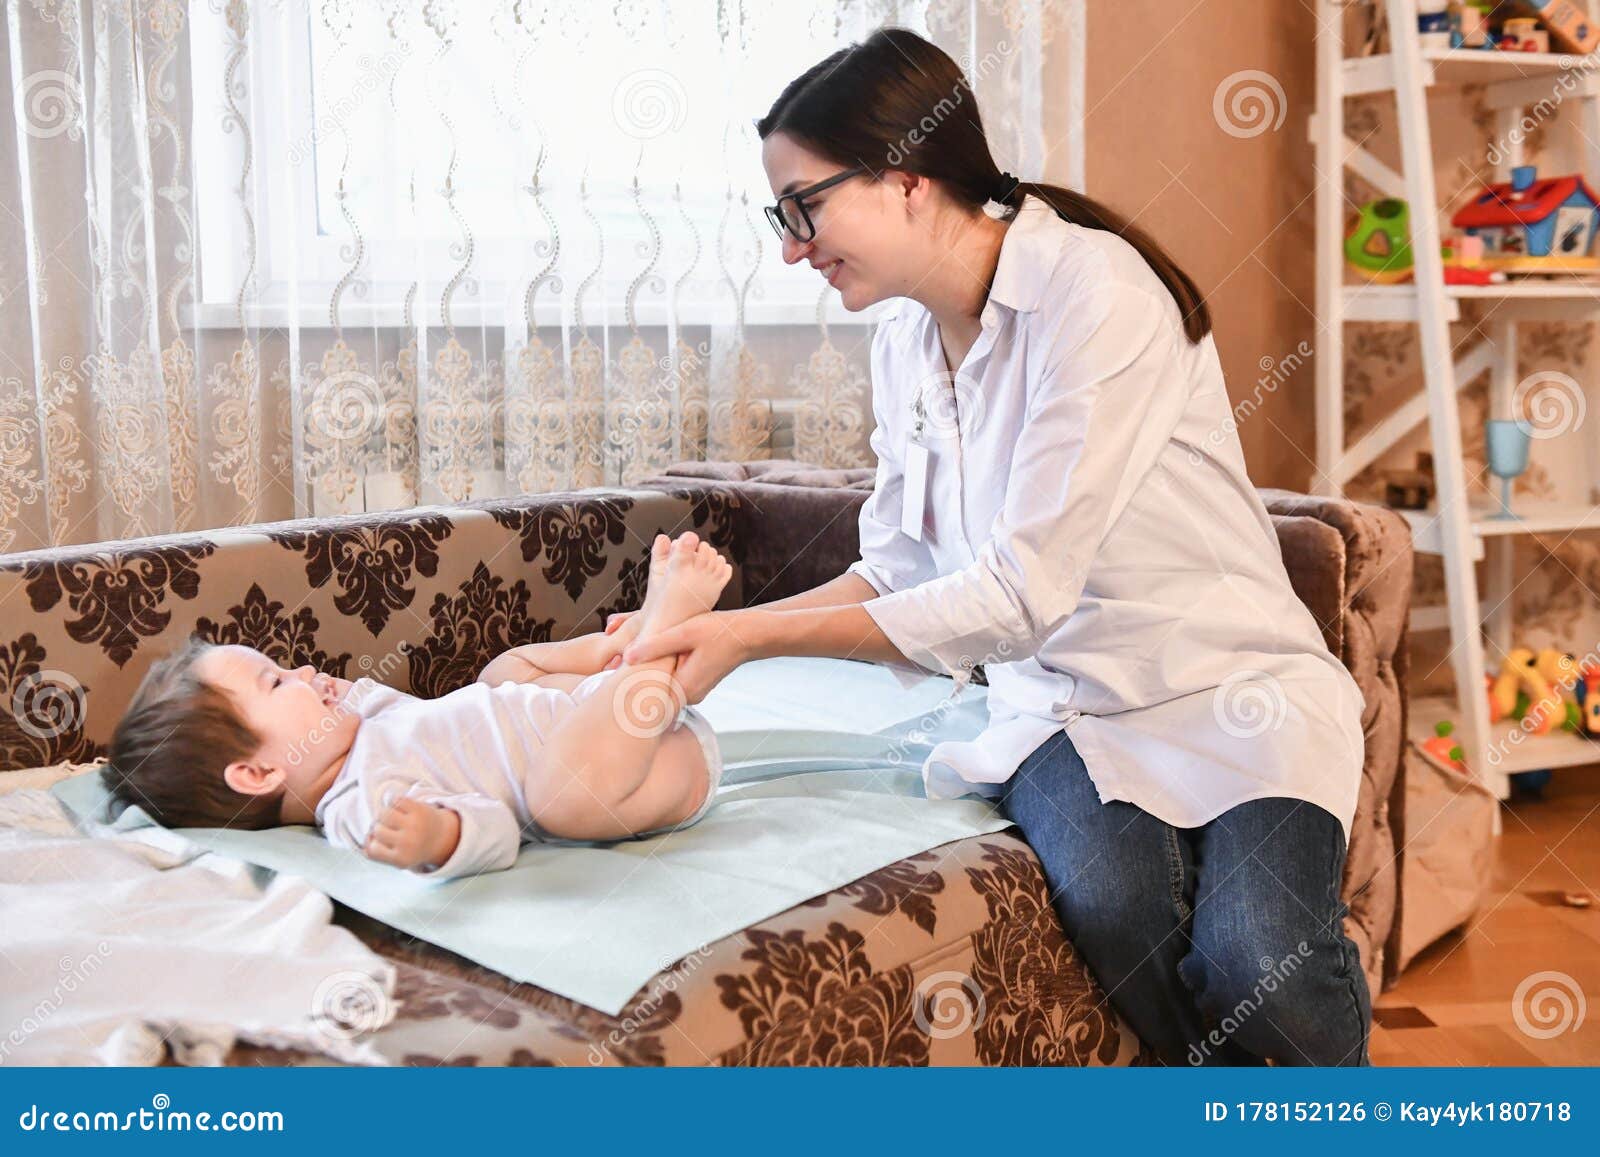 family pediatrician doctor family doctors home visit to a sick child